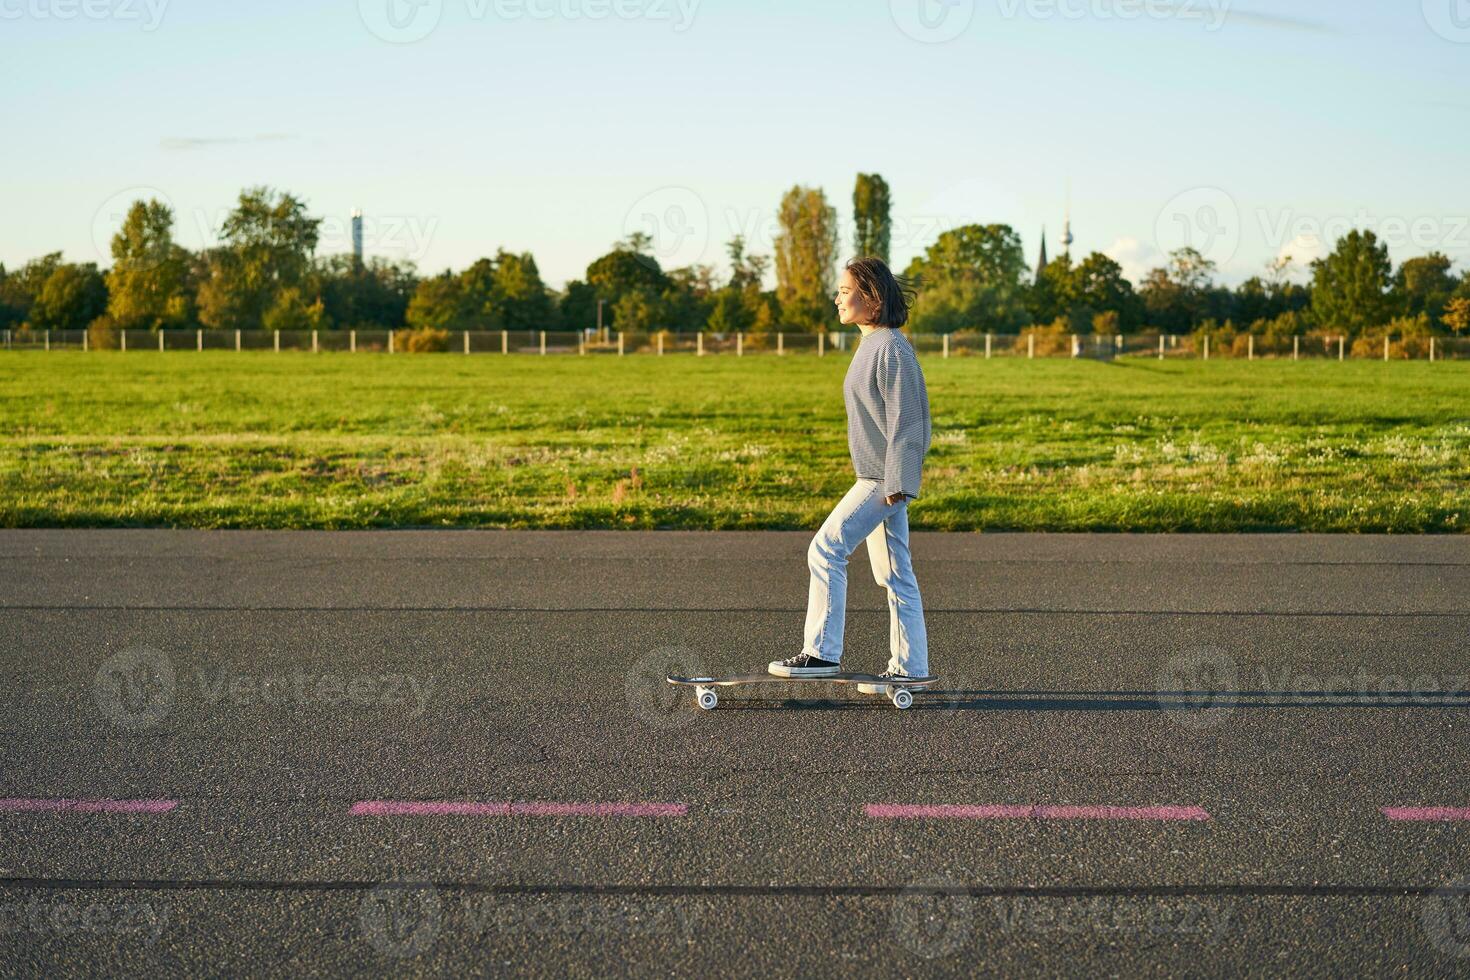 Beautiful asian skater girl riding her longboard on sunny empty road. Young woman enjoying her skate ride smiling and laughing photo